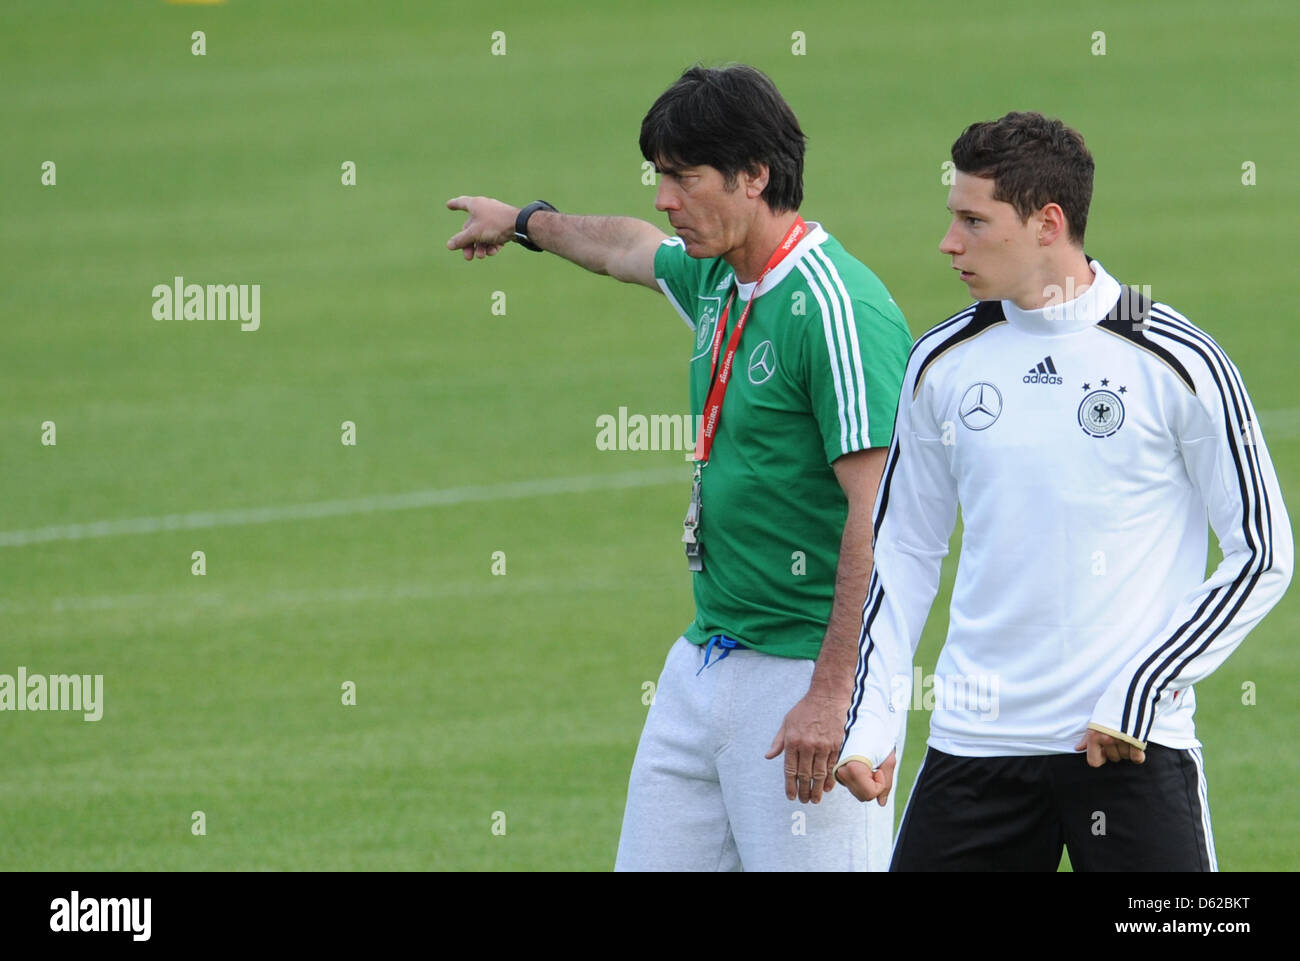 Germany's head coach Joachim Loew (L) and Julian Draxler take part in practice near Callian, France, 18 May 2012. The German national team is preparing for the Euro 2012 in southern France until 20 May. Photo: ANDREAS GEBERT Stock Photo